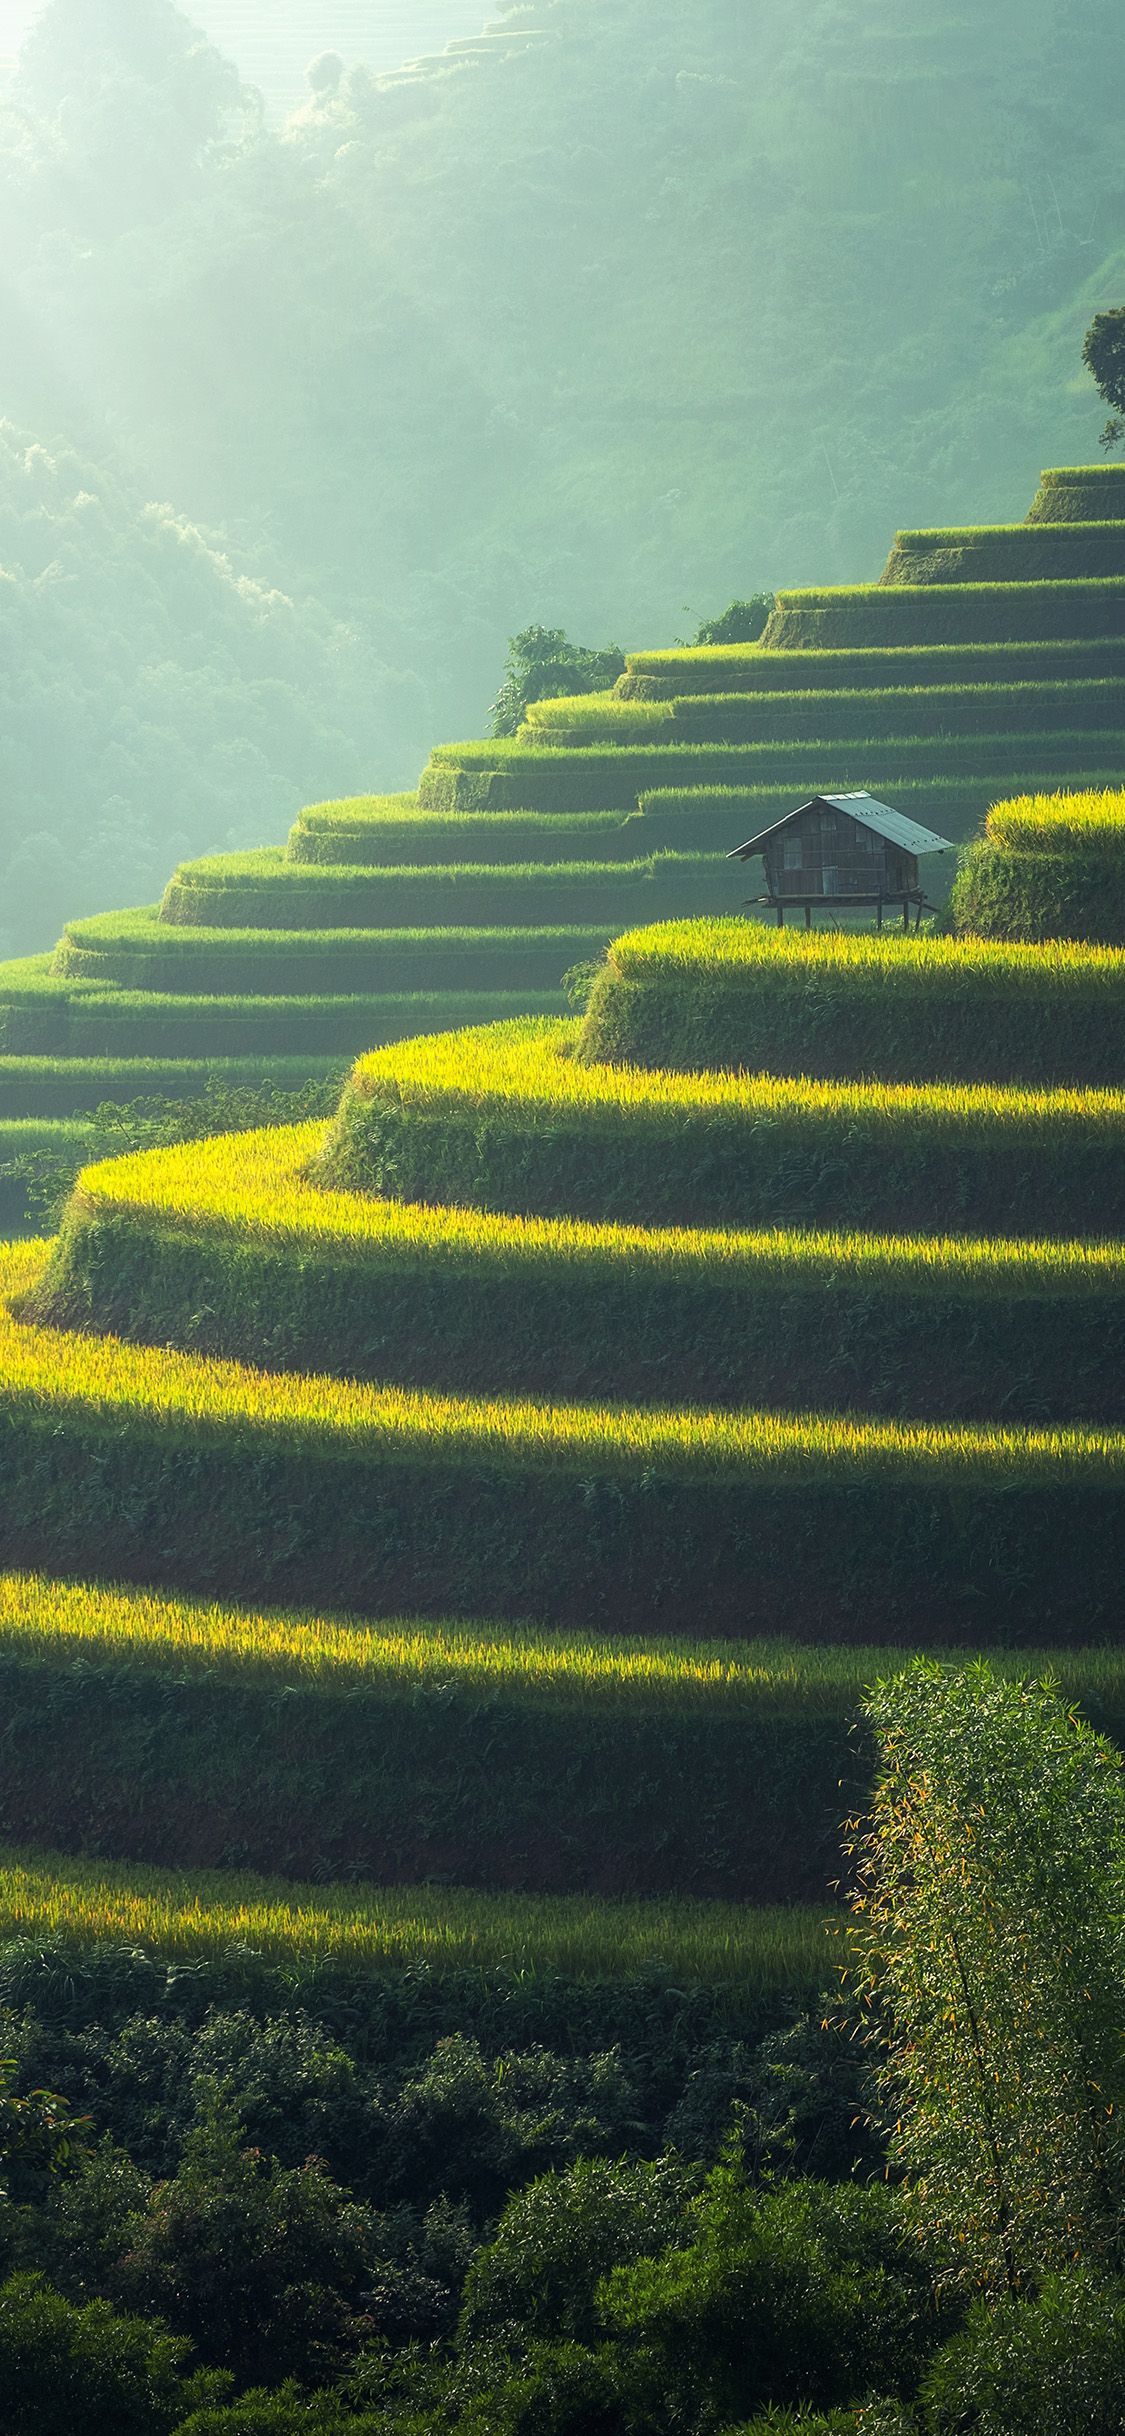 A house on the top of a hill surrounded by rice terraces - Farm